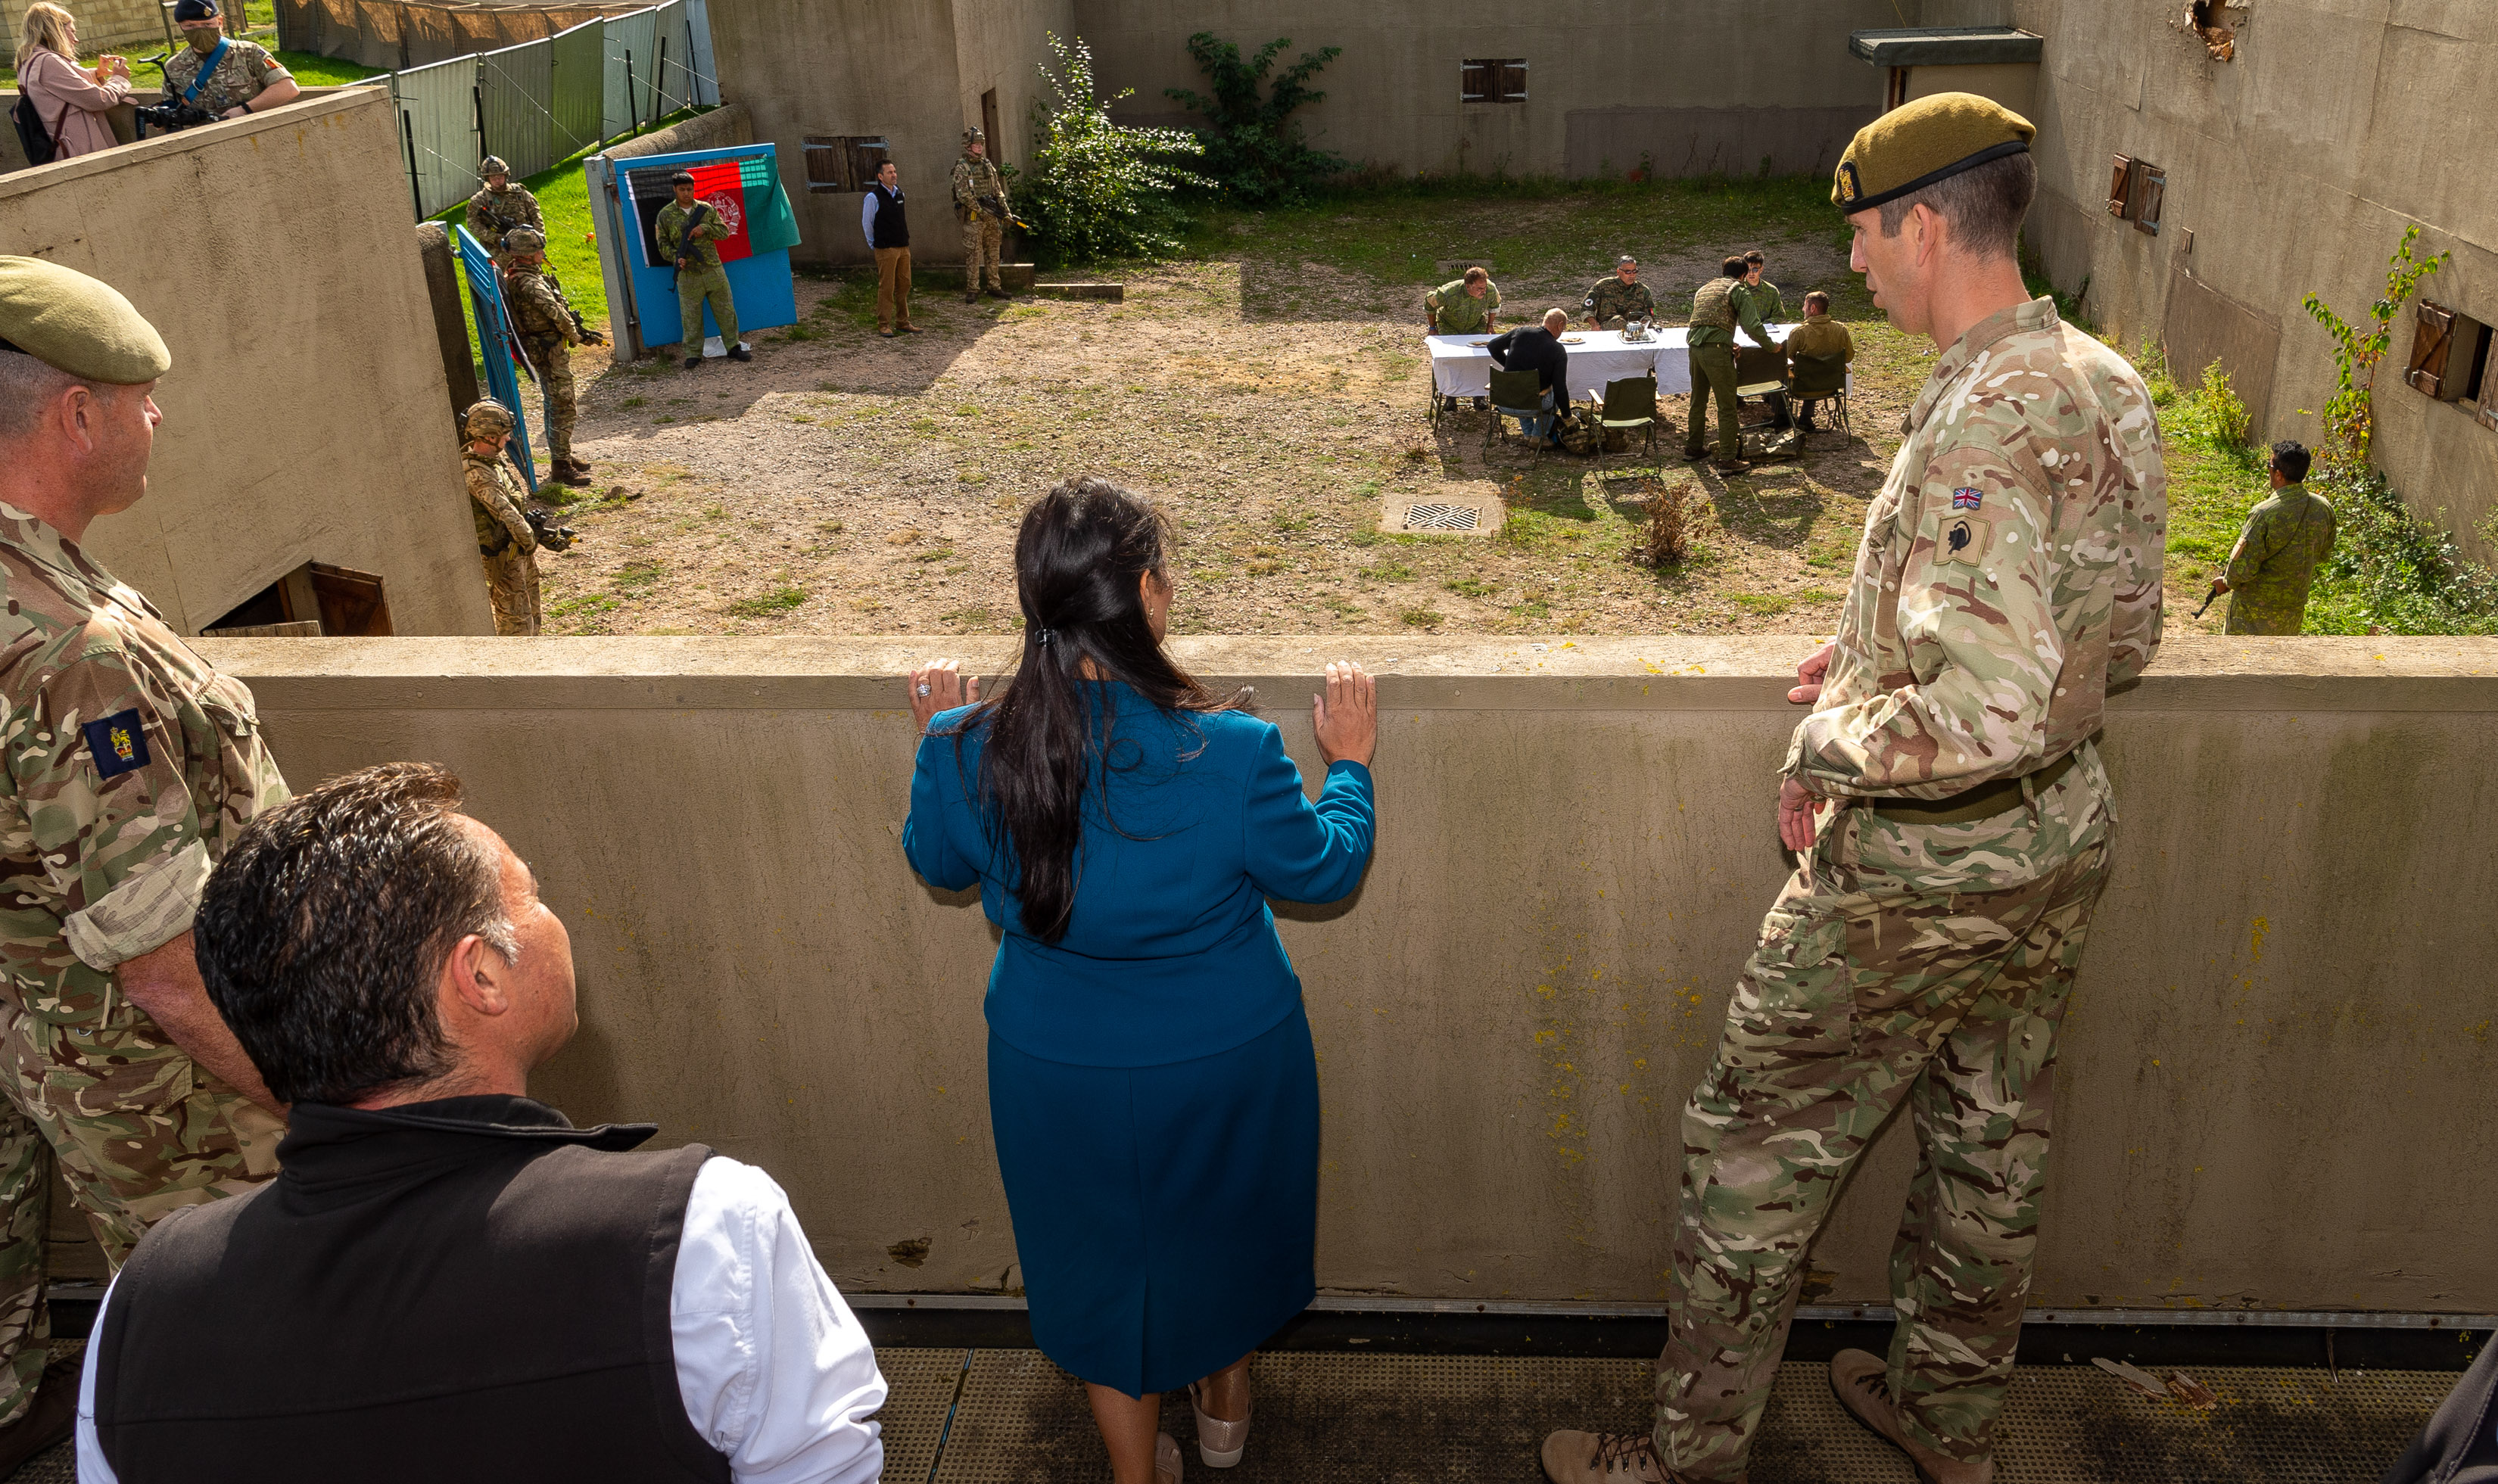 Priti Patel is pictured overlooking interpreter training from a balcony.